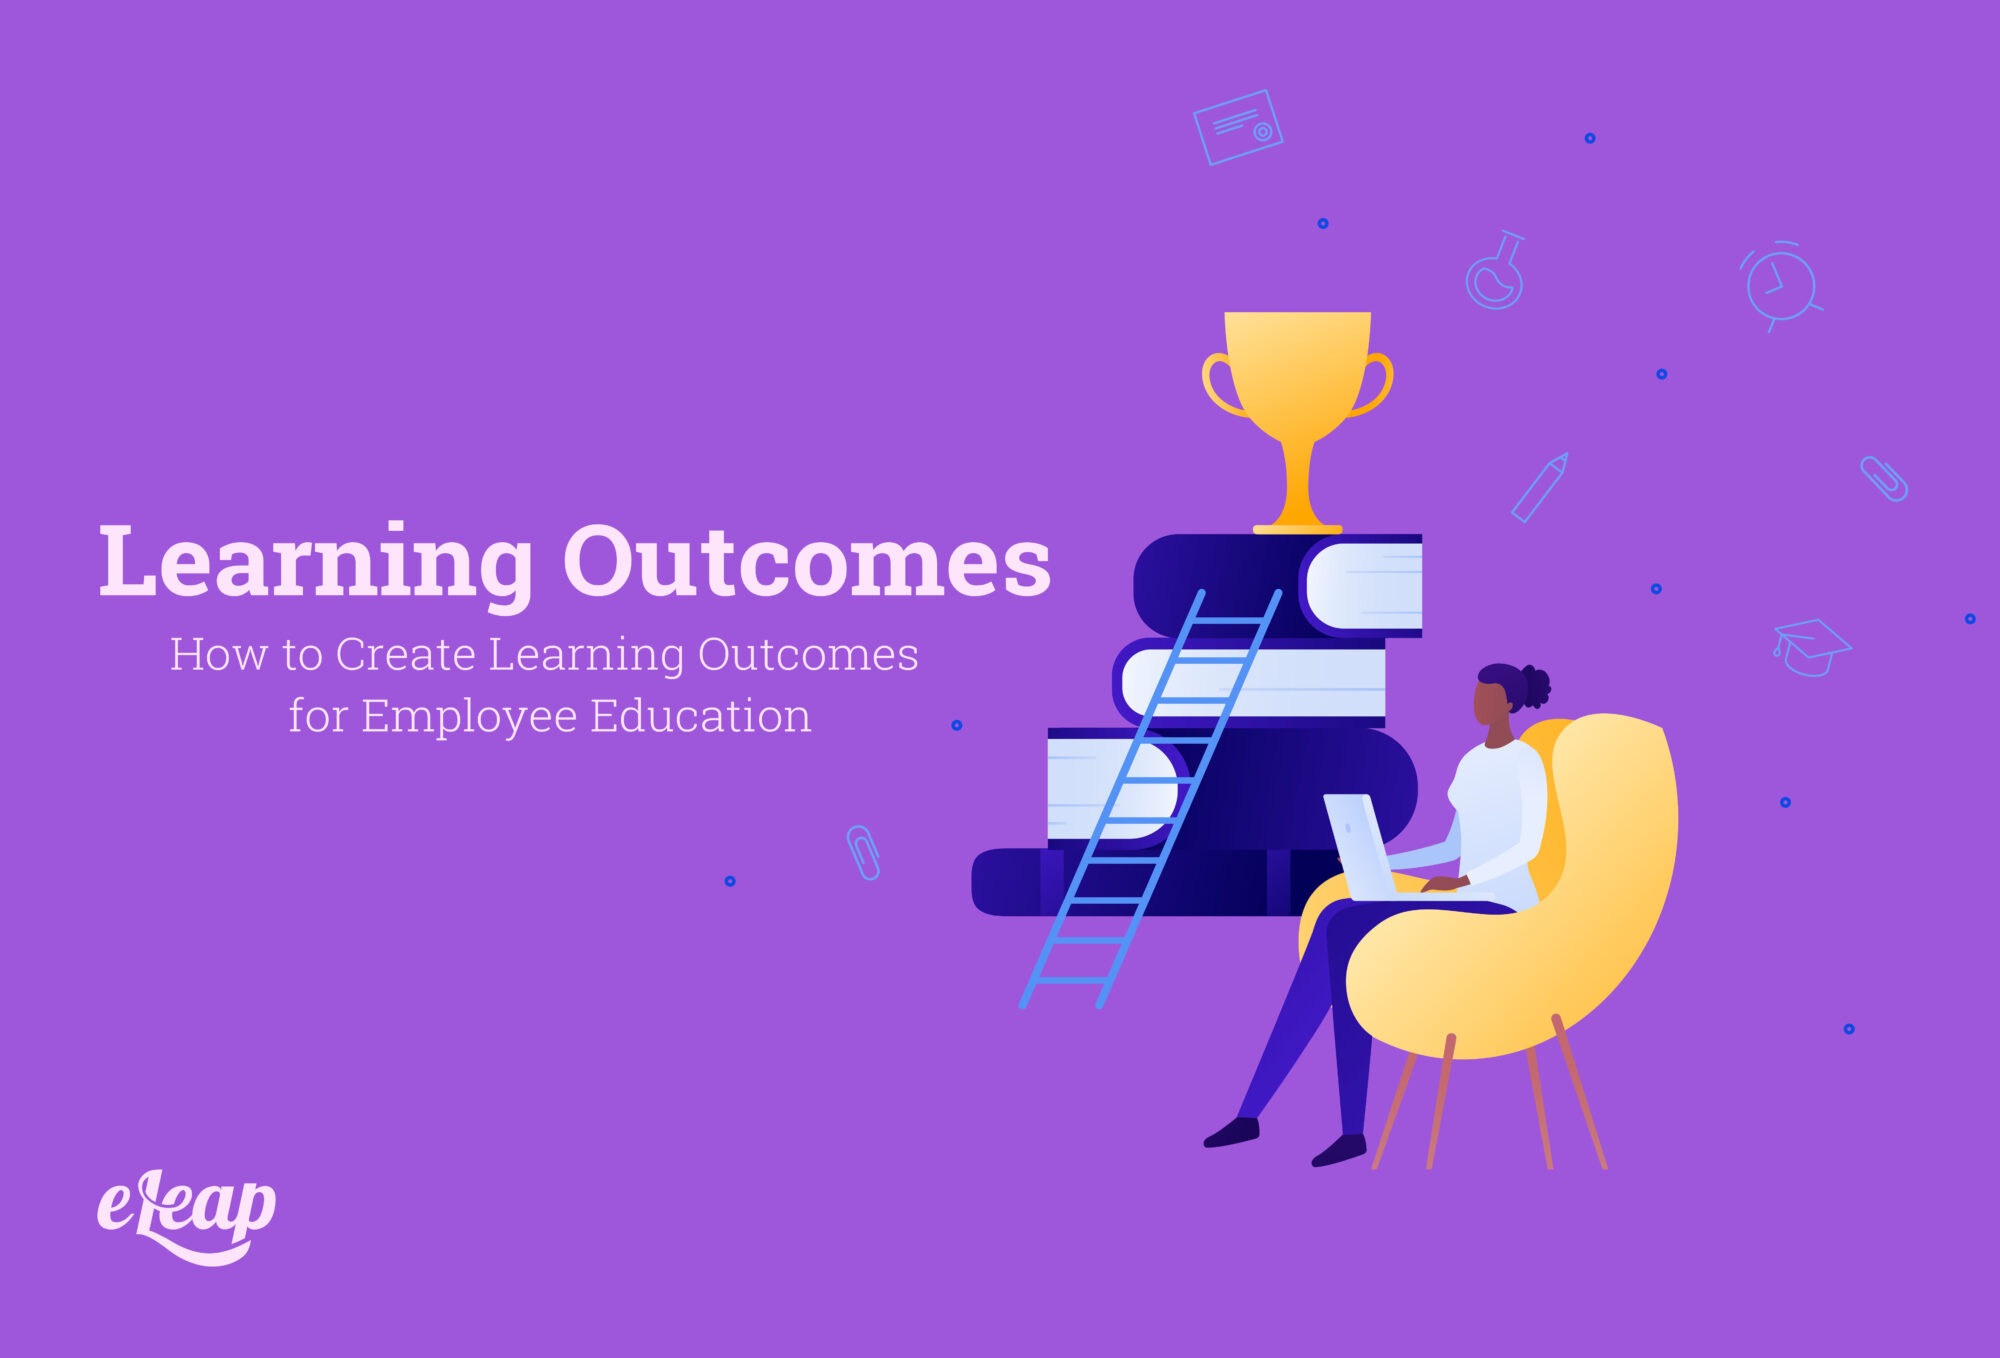 How to Create Learning Outcomes for Employee Education